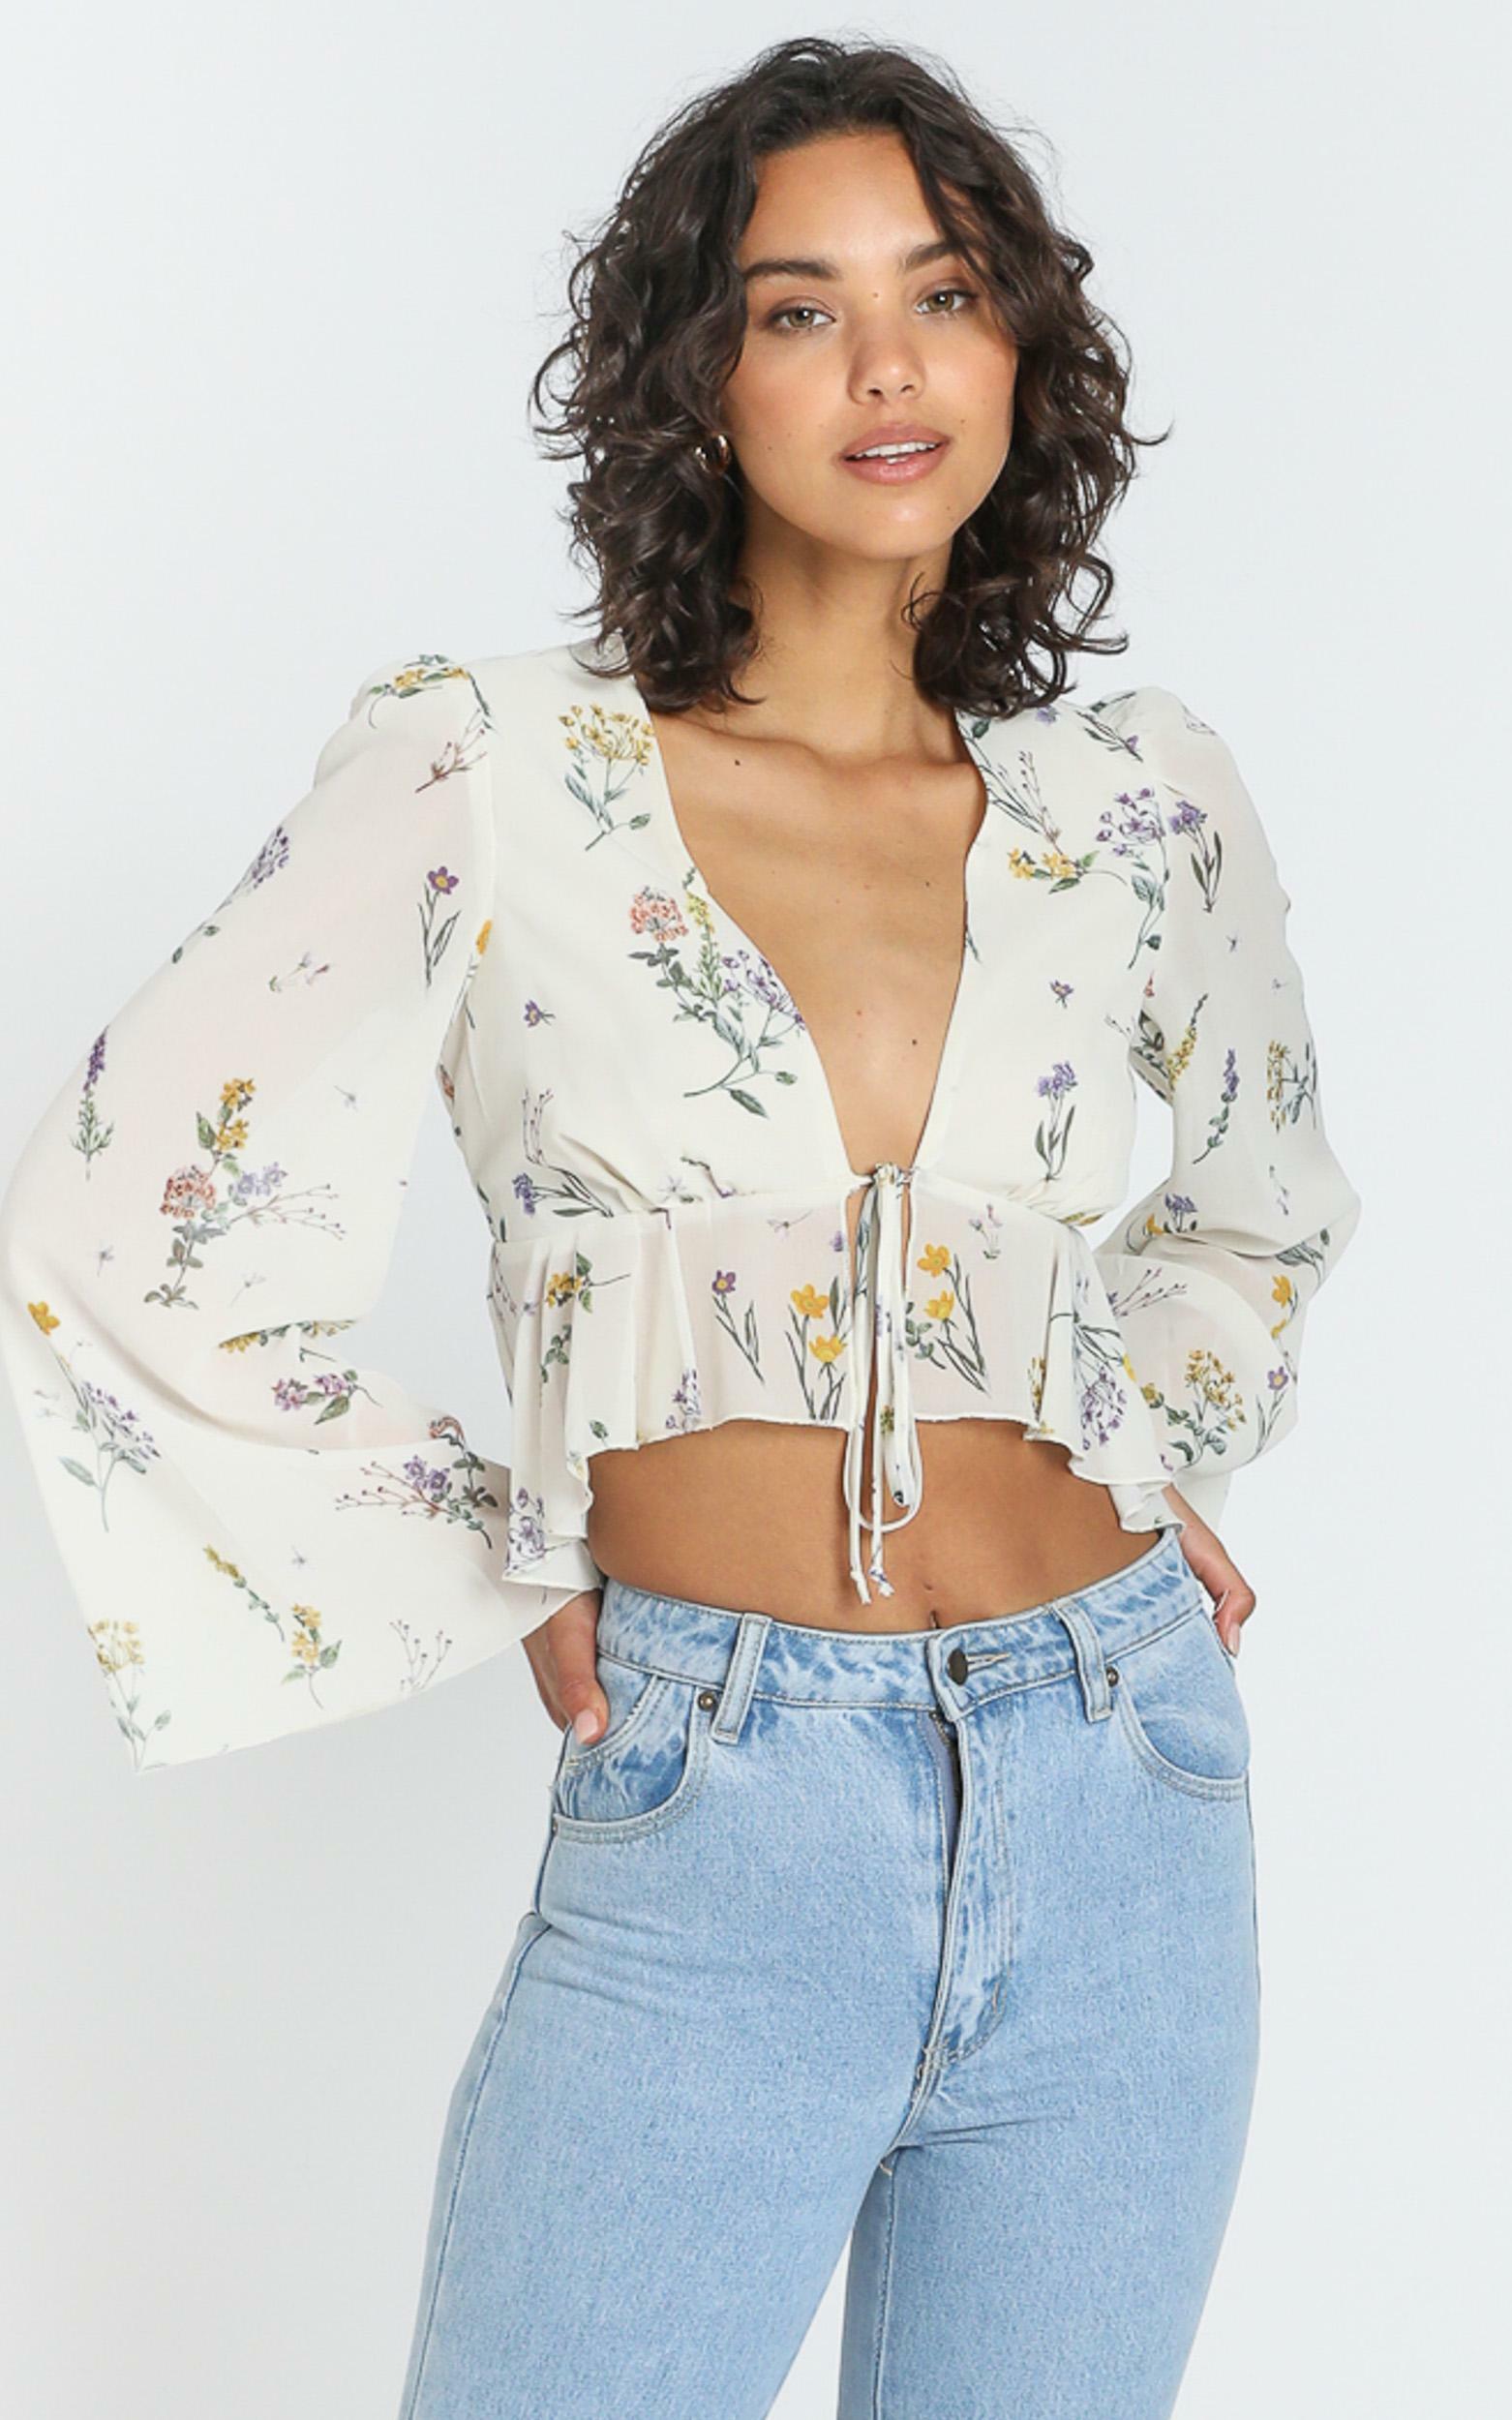 Dance It Out Top in botanical floral - 4 (XXS), WHT2, hi-res image number null